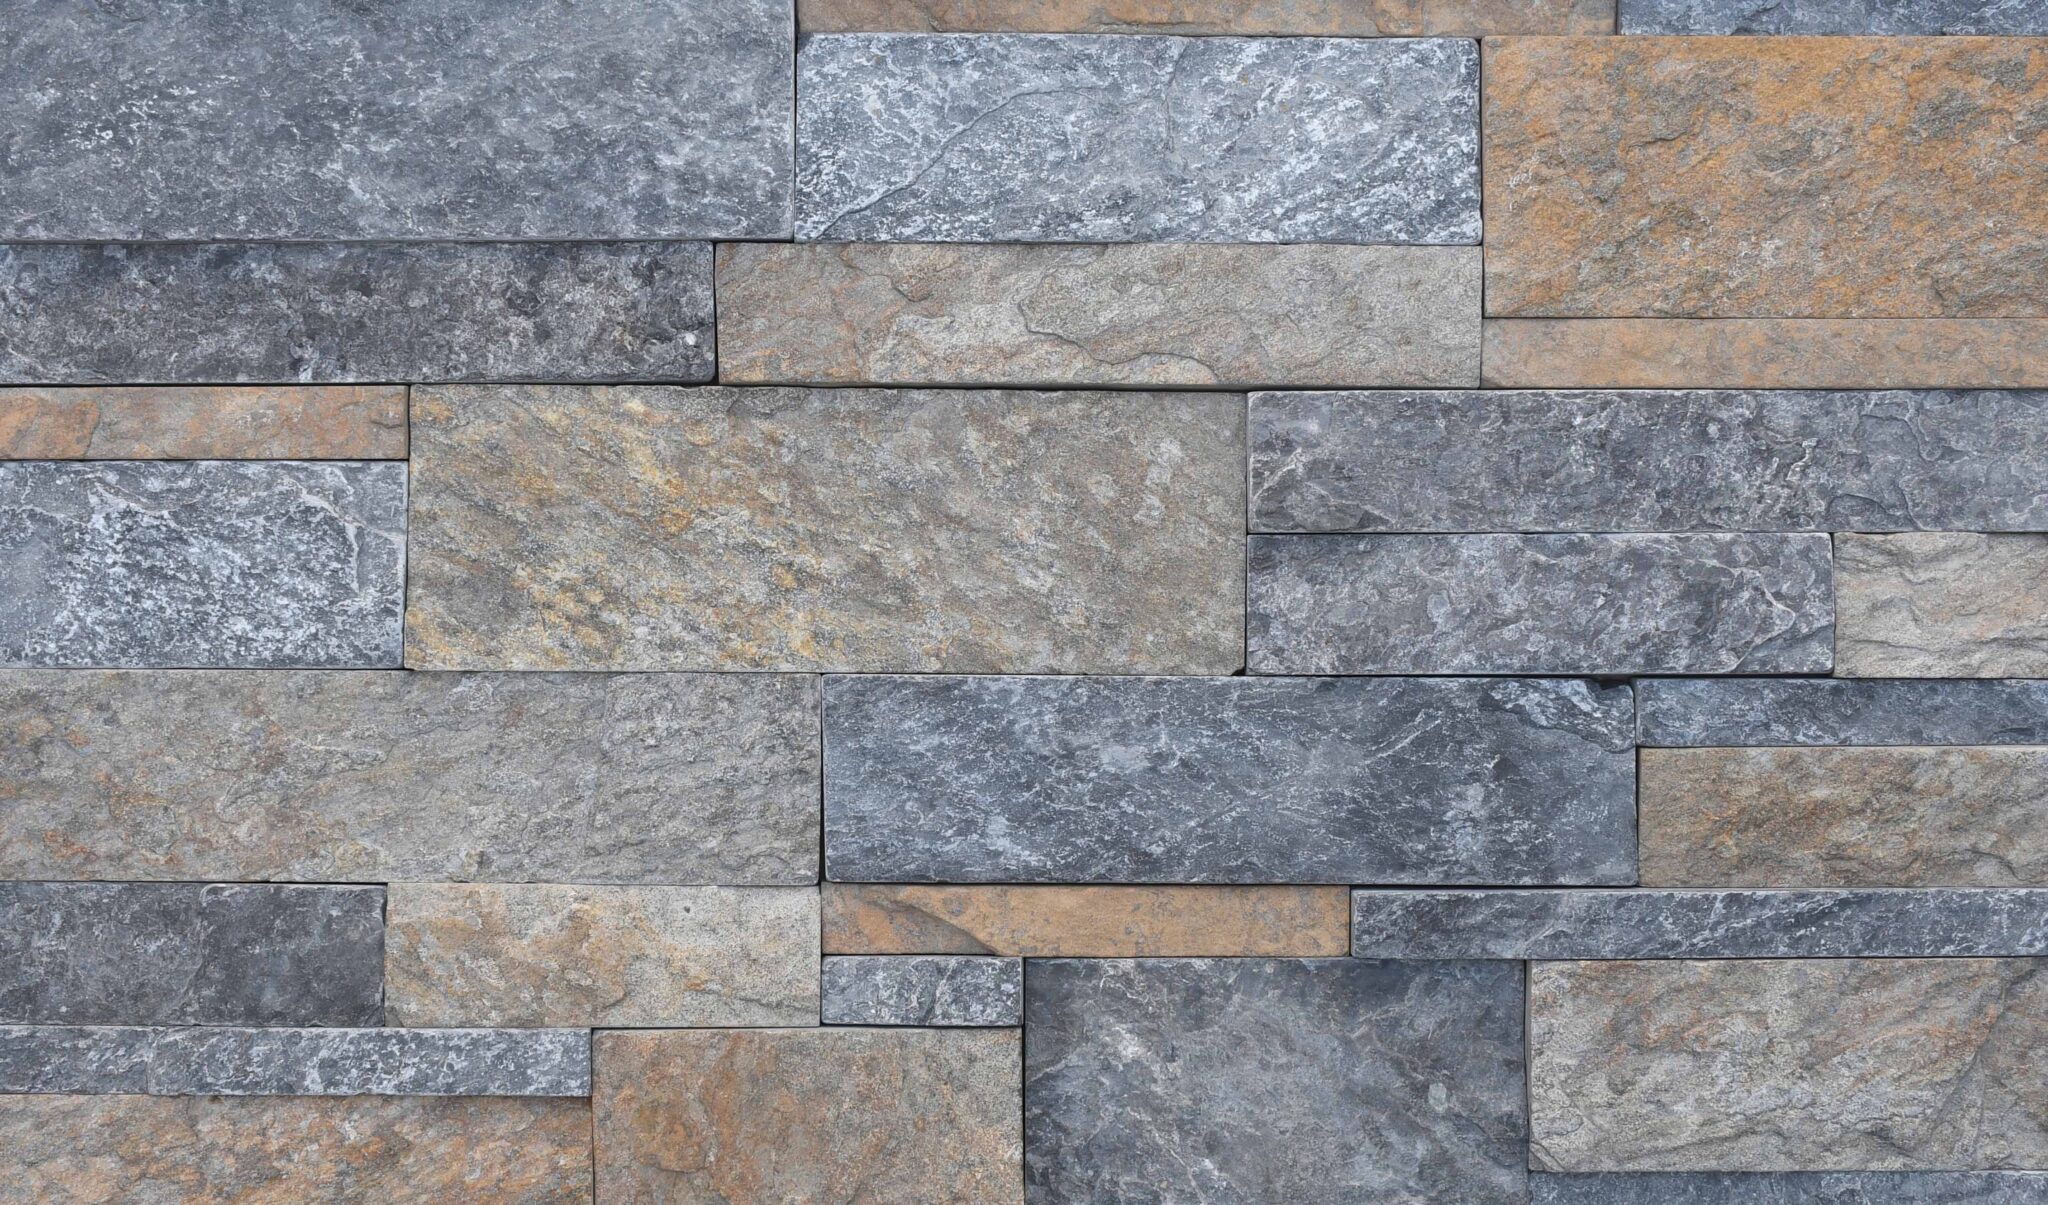 Pangaea® Natural Stone - 4 Course Ashlar Formfit, Lancaster with tight fit mortar joints